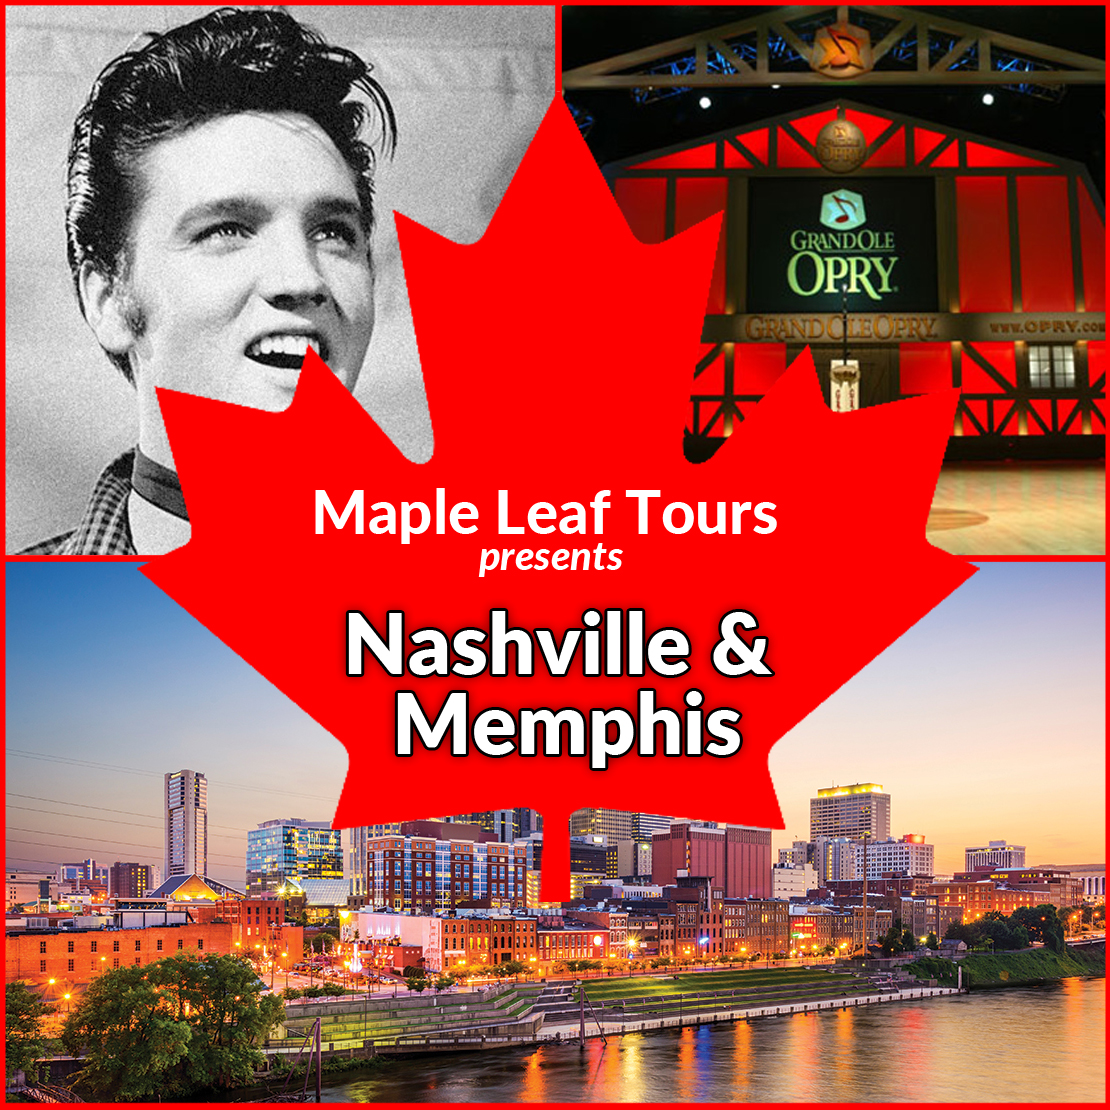 tour to memphis from nashville